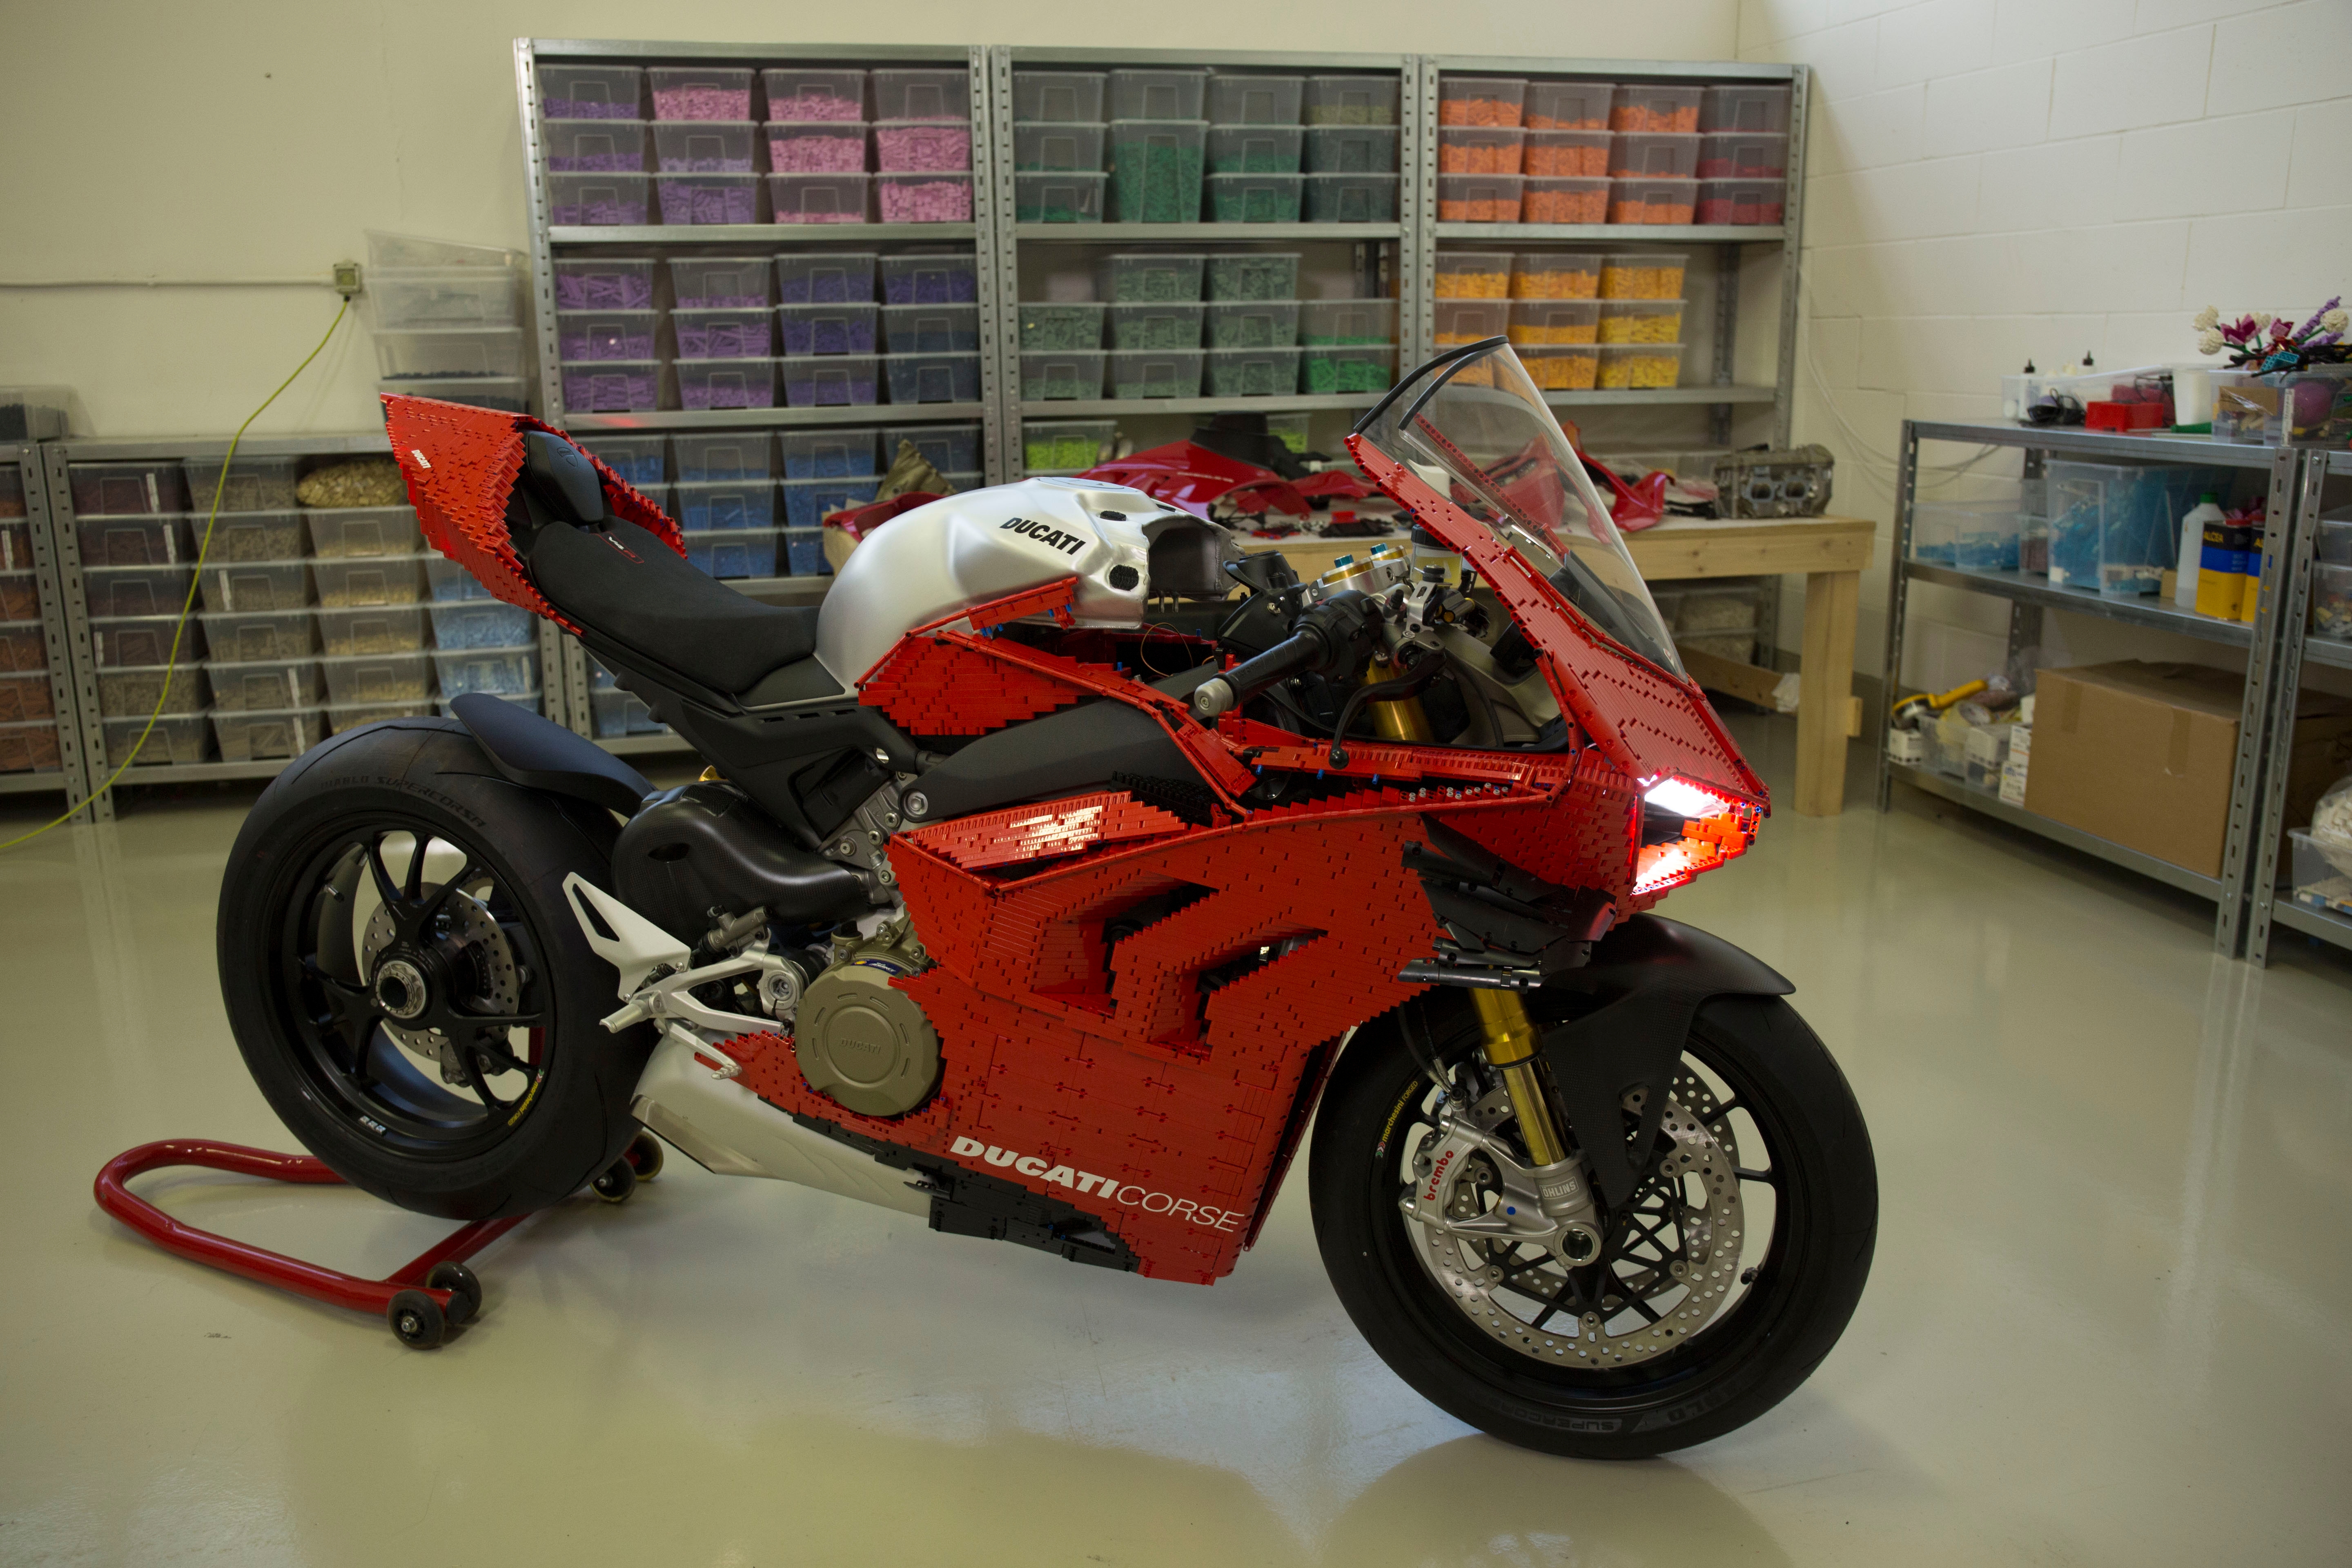 Ducati Panigale 1:1 Model - About Us 